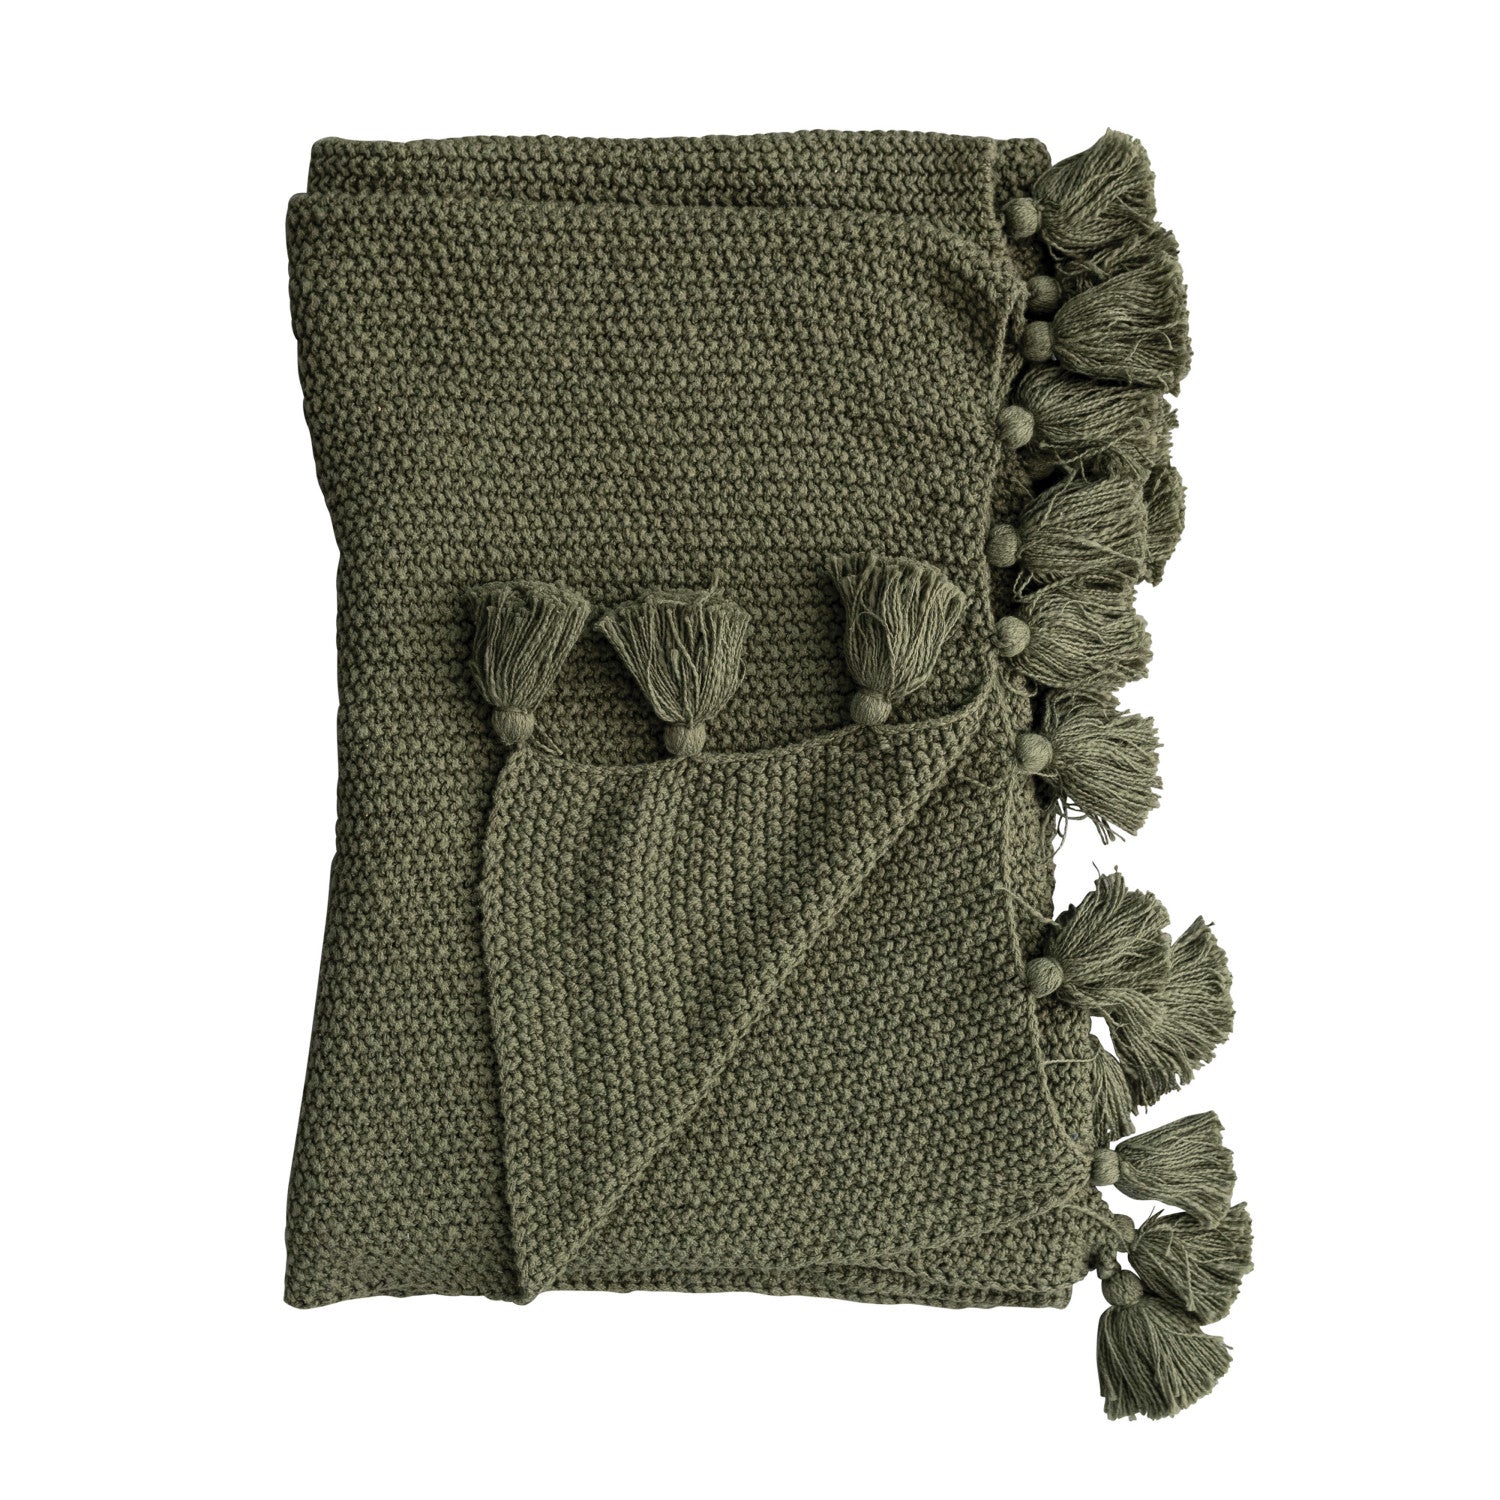 Cotton Knit Throw, Olive Green